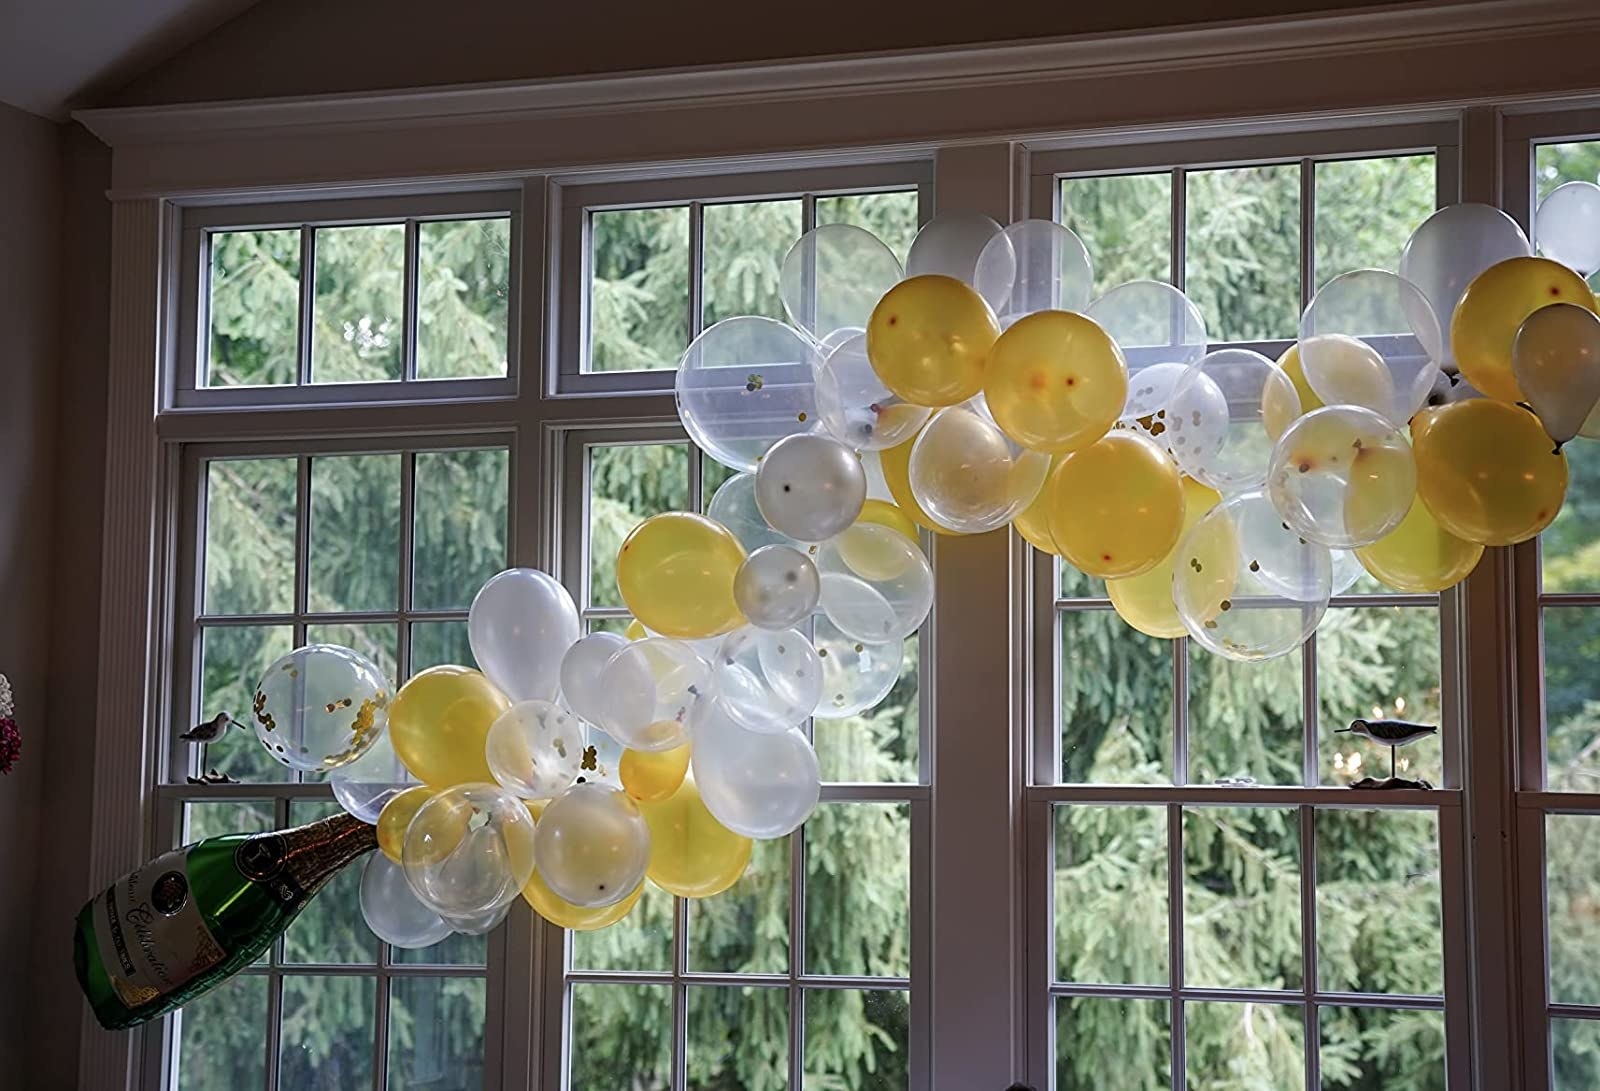 Reviewer image of balloon garland hung on the window